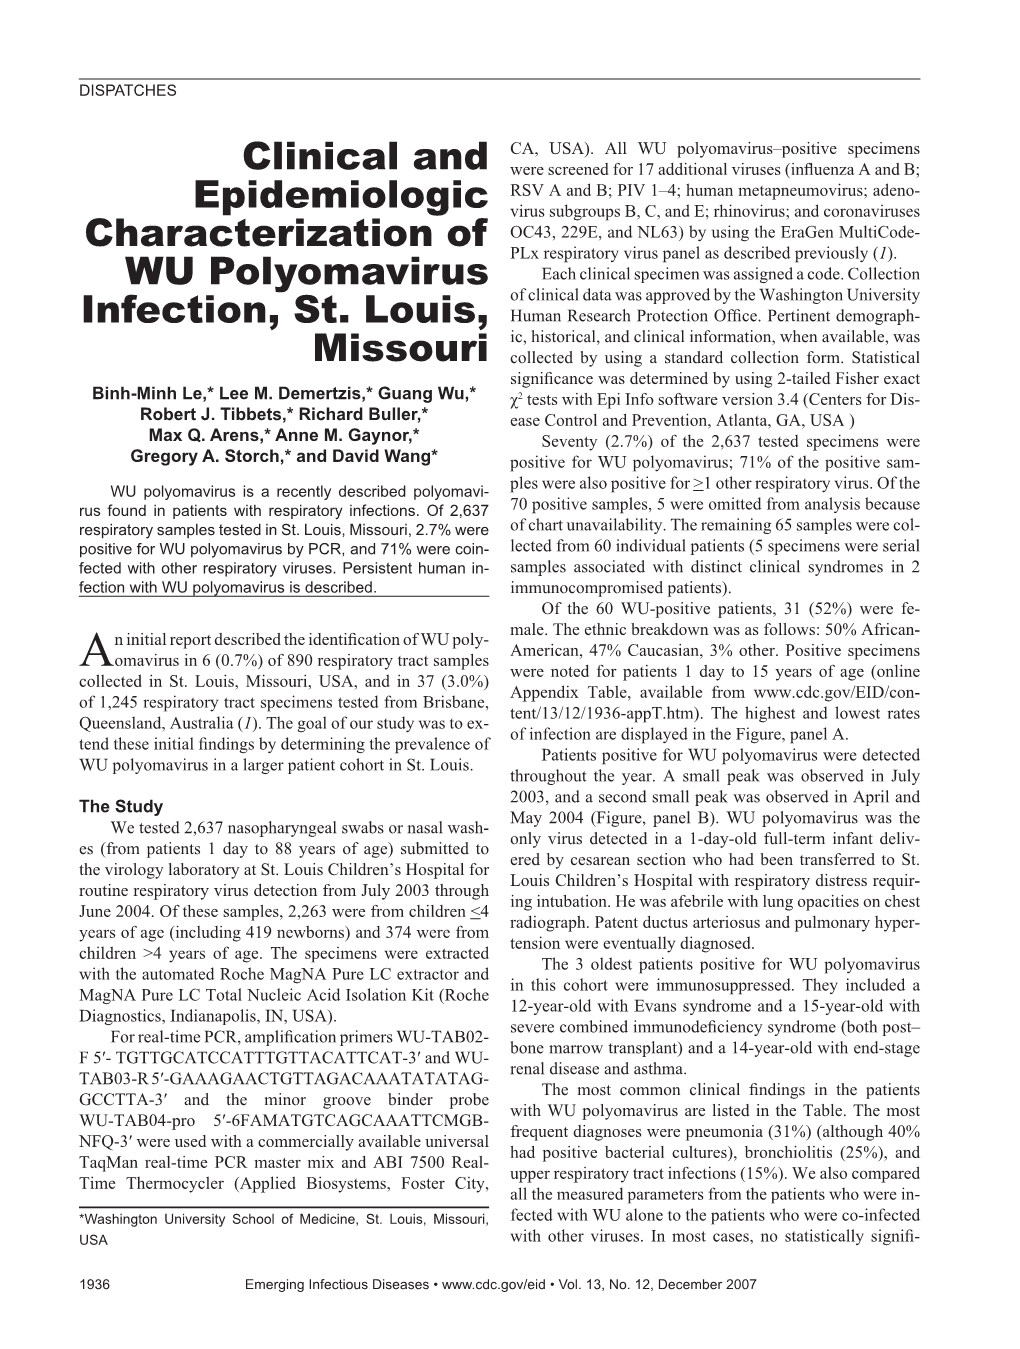 Clinical and Epidemiologic Characterization of WU